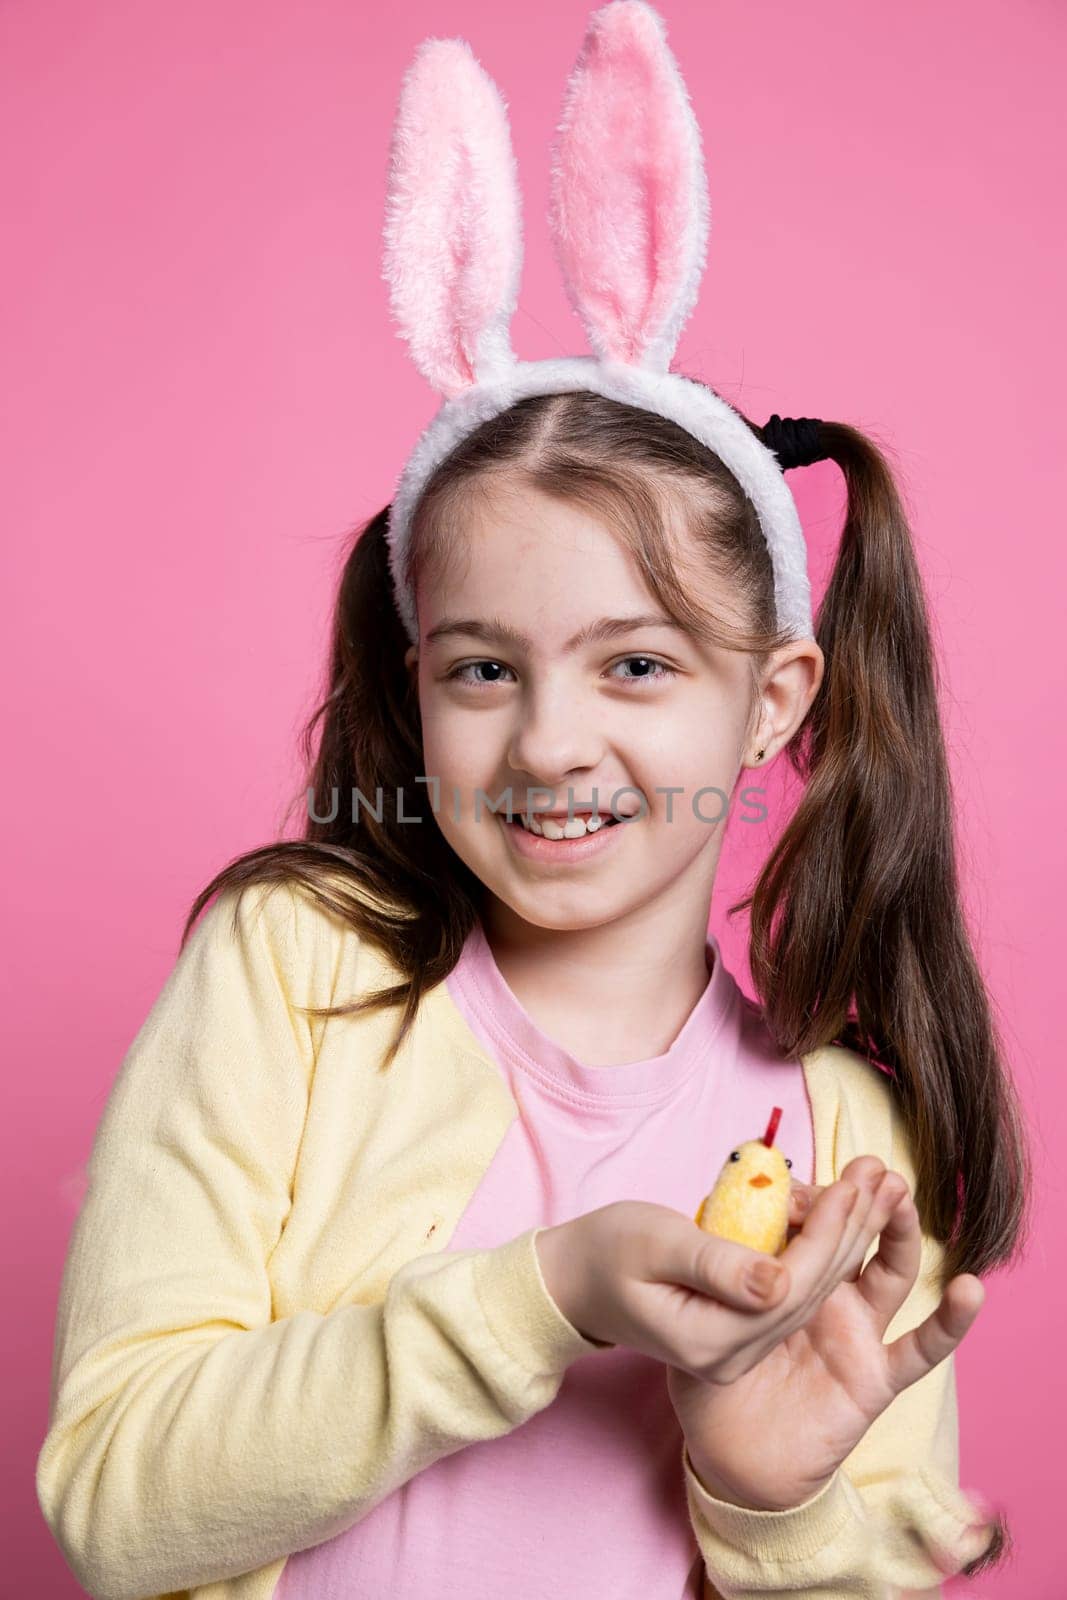 Small joyful girl presenting a fluffy chick toy in pink studio, adorable young child with golden stuffed toy over colored background. Little kid with festive bunny ears for seasonal celebration.